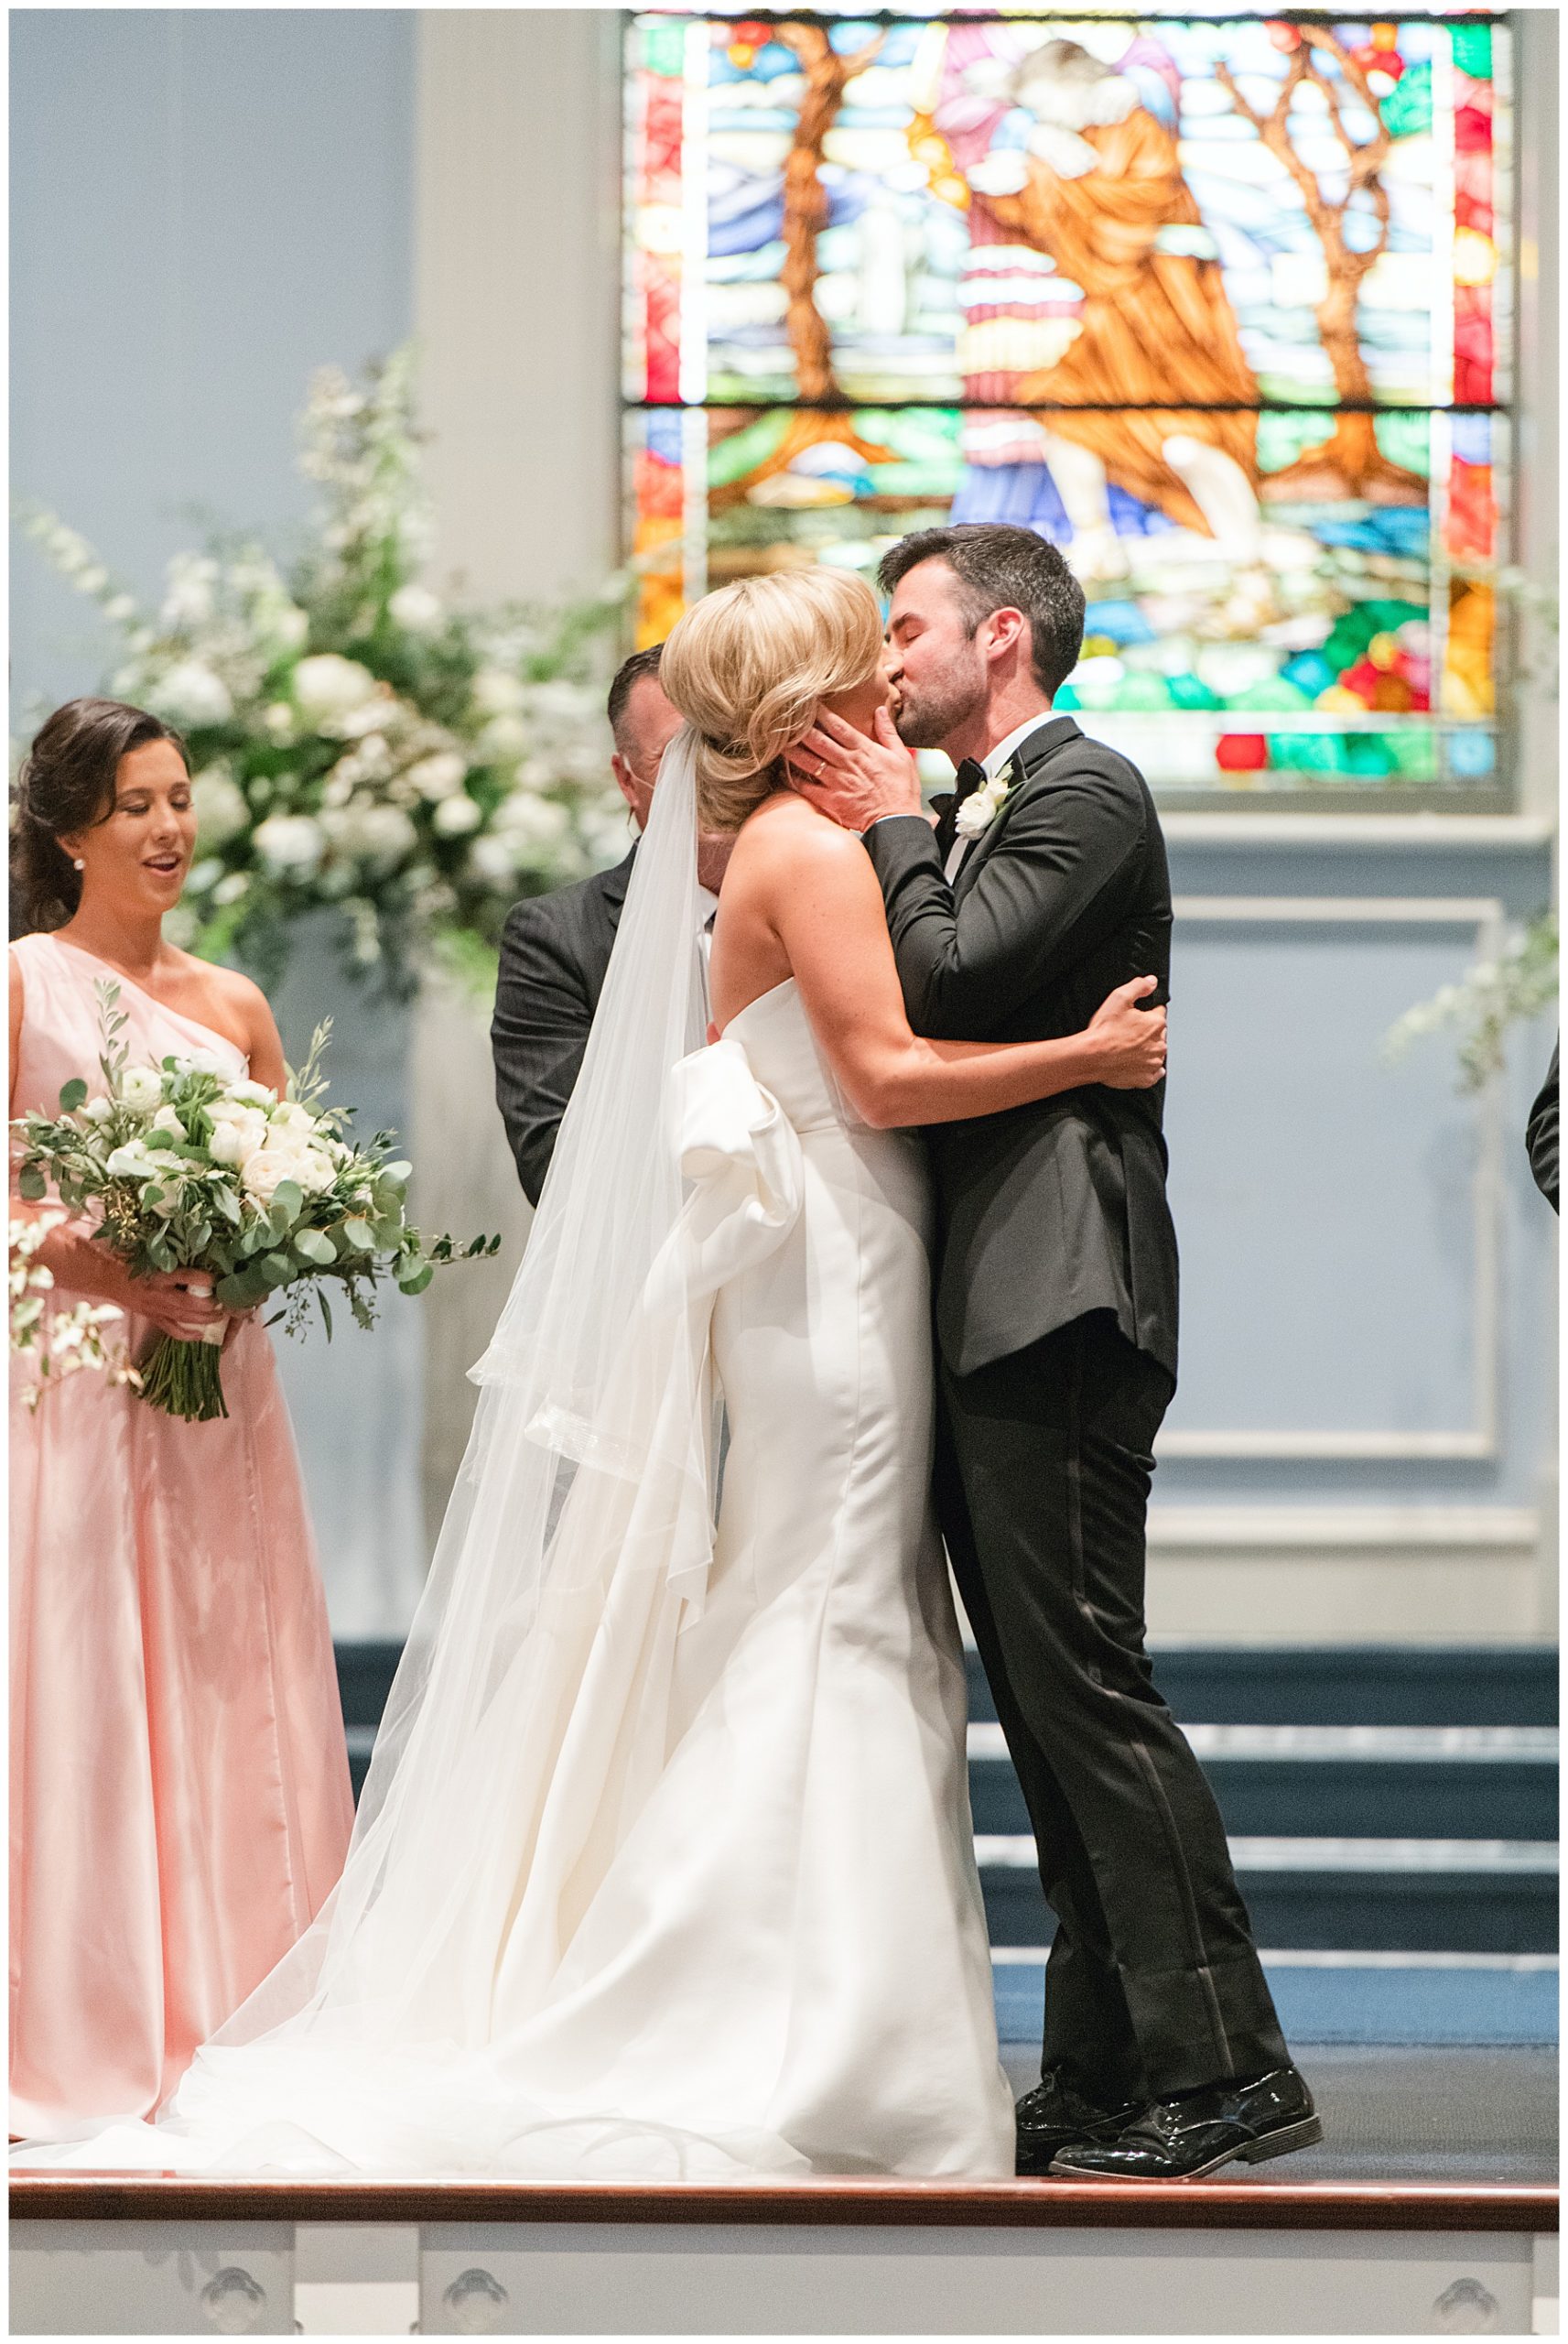 First kiss at wedding ceremony